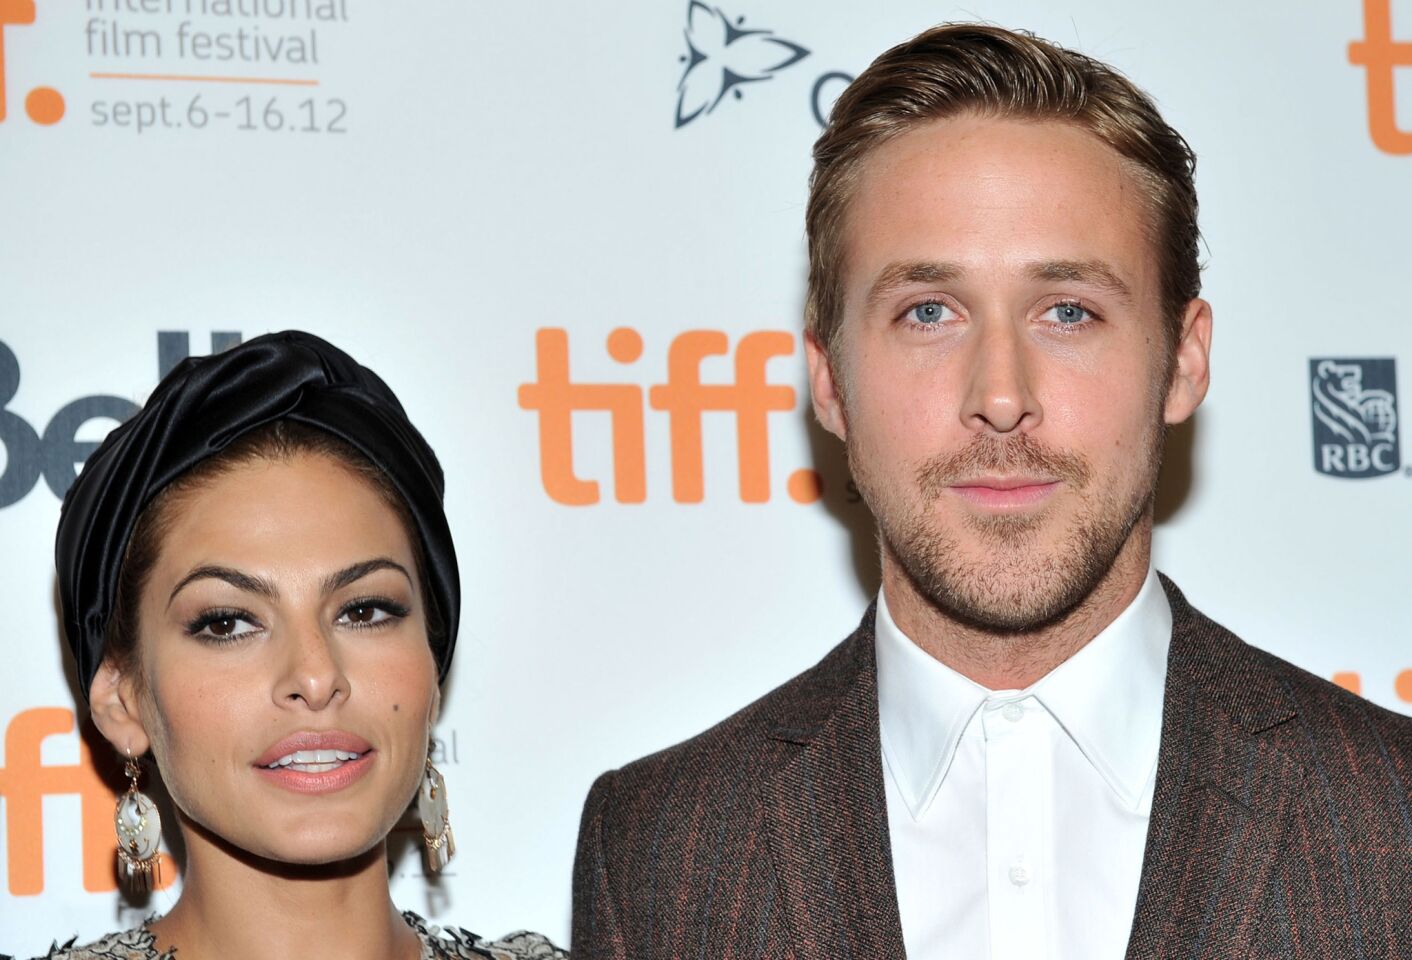 Eva Mendes went seven months of being pregnant before any news outlets knew about it! Finally, Mendes and her boyfriend Ryan Gosling welcomed a little girl. This is the first child for the pair, who have been dating for nearly three years, since the fall of 2011.